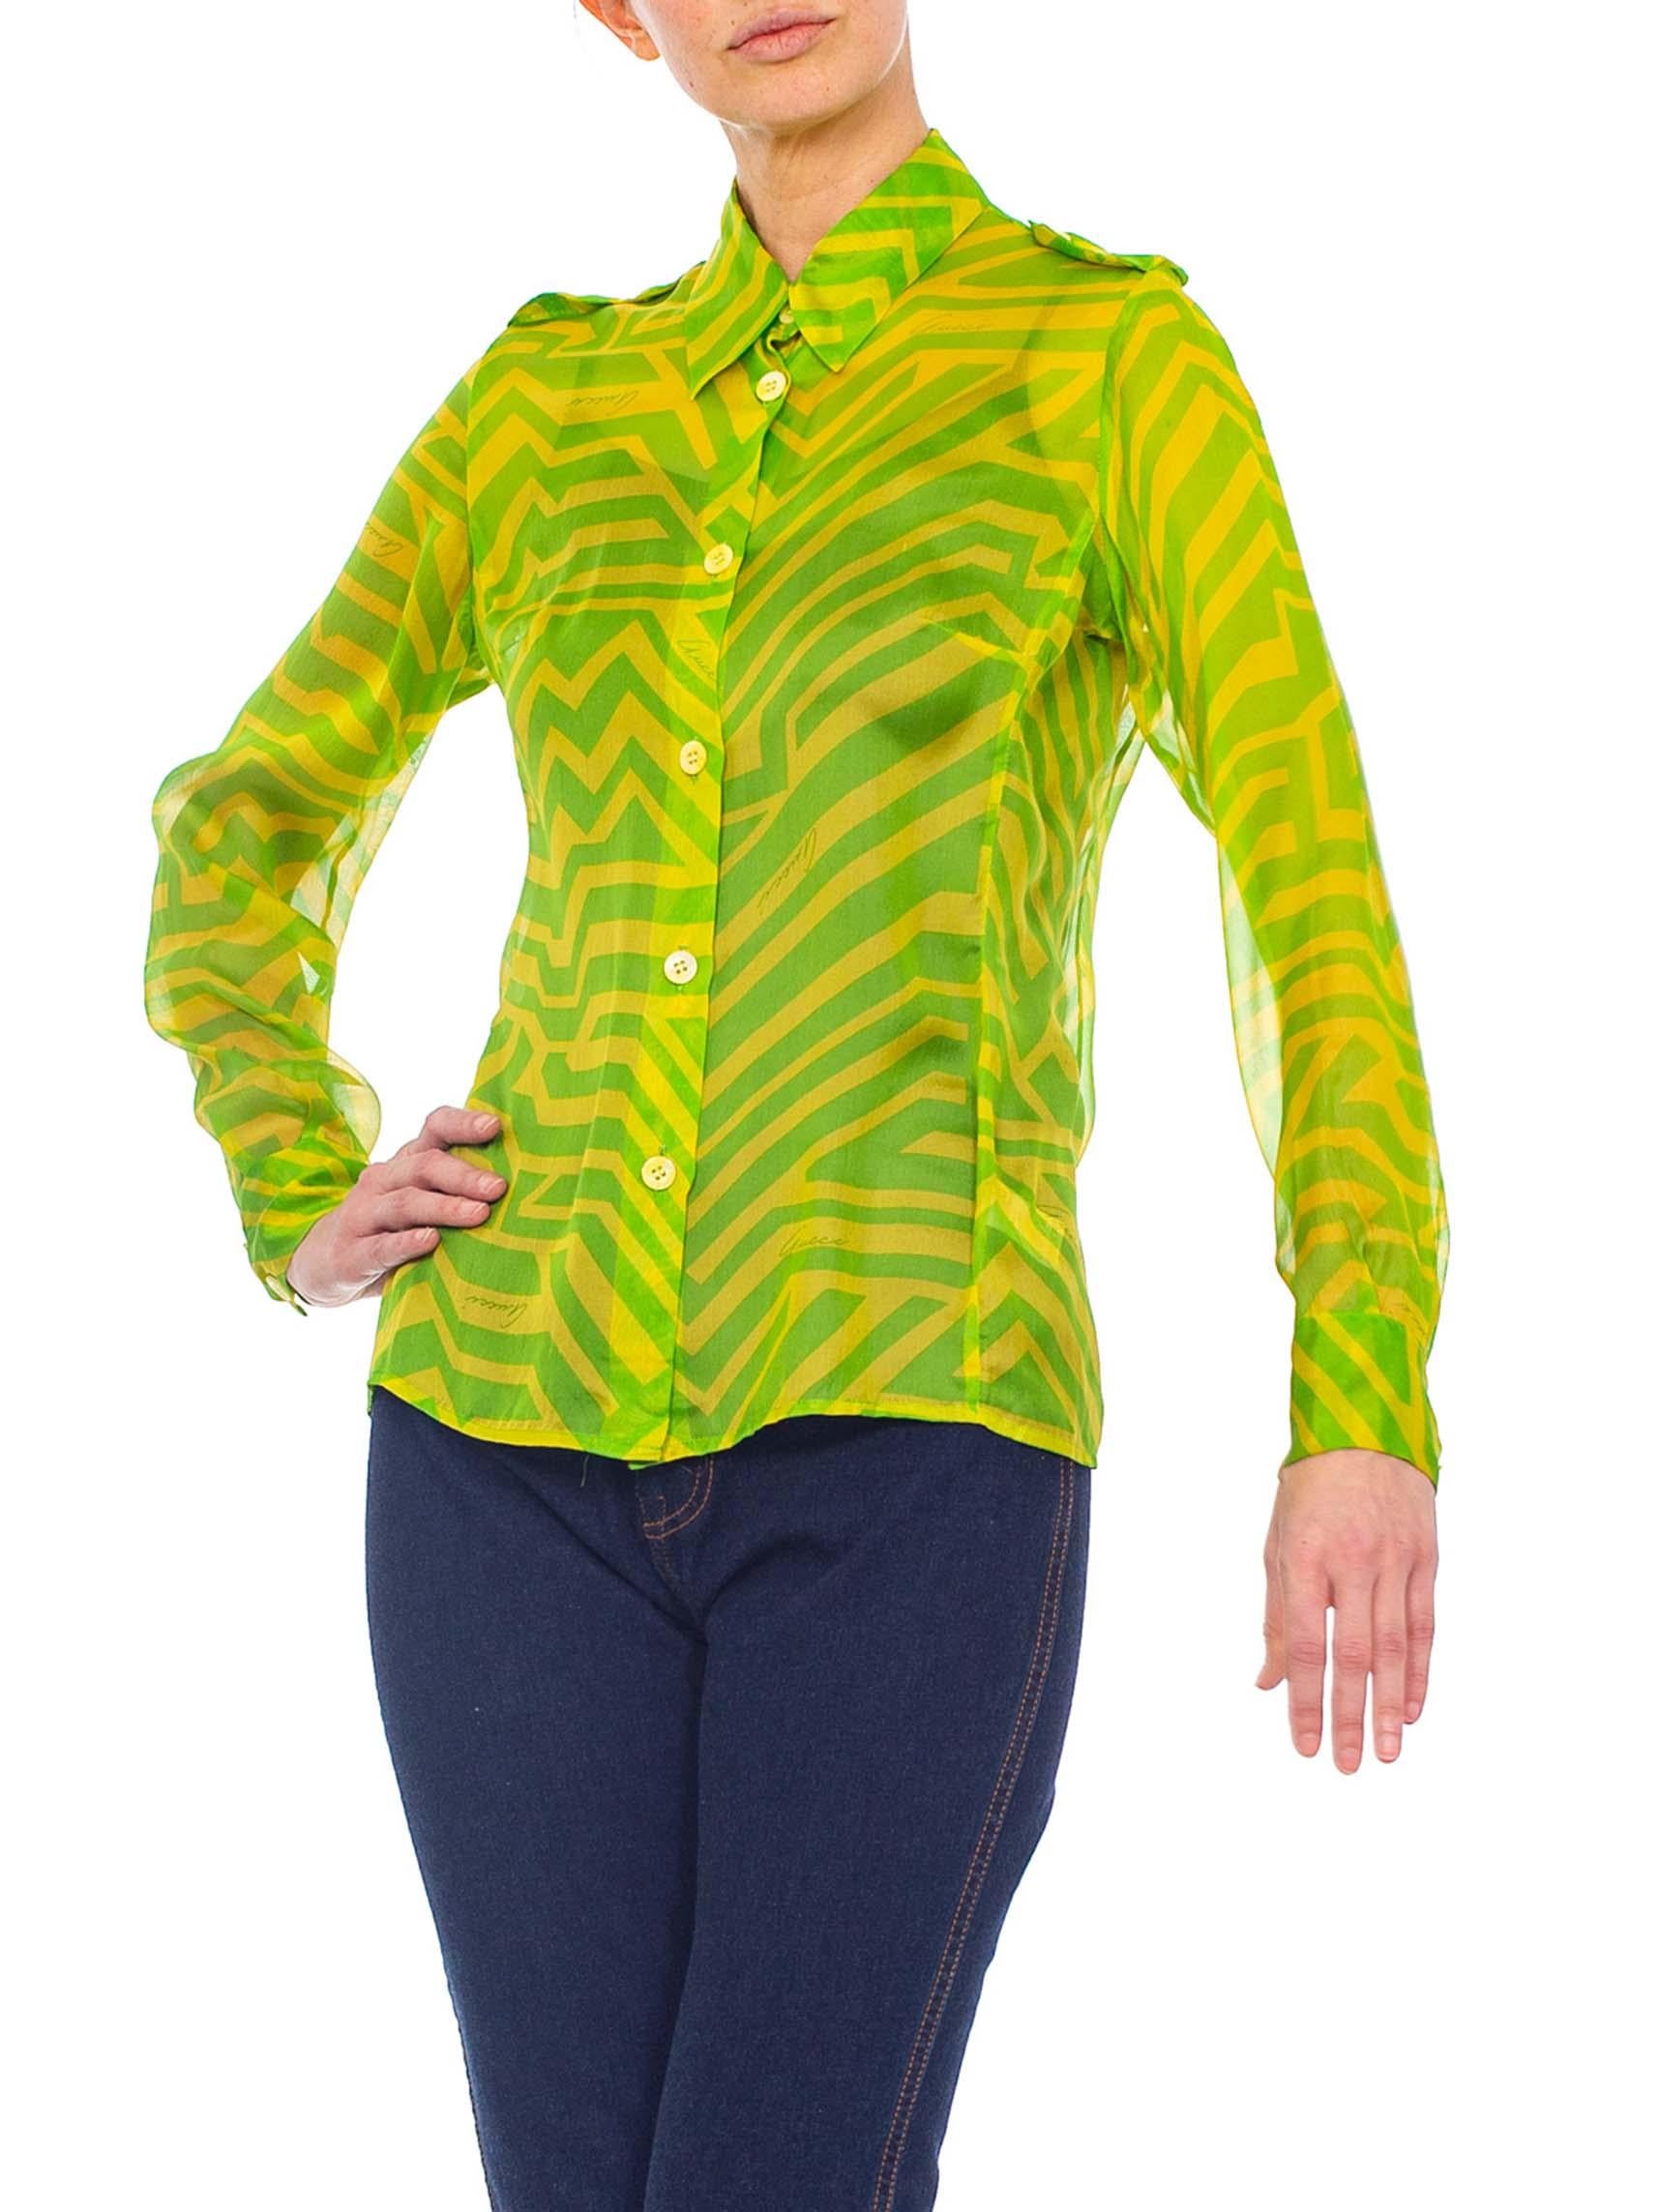 1990S TOM FORD GUCCI Lime Green Silk Chiffon Shirt From His First Collection For 2